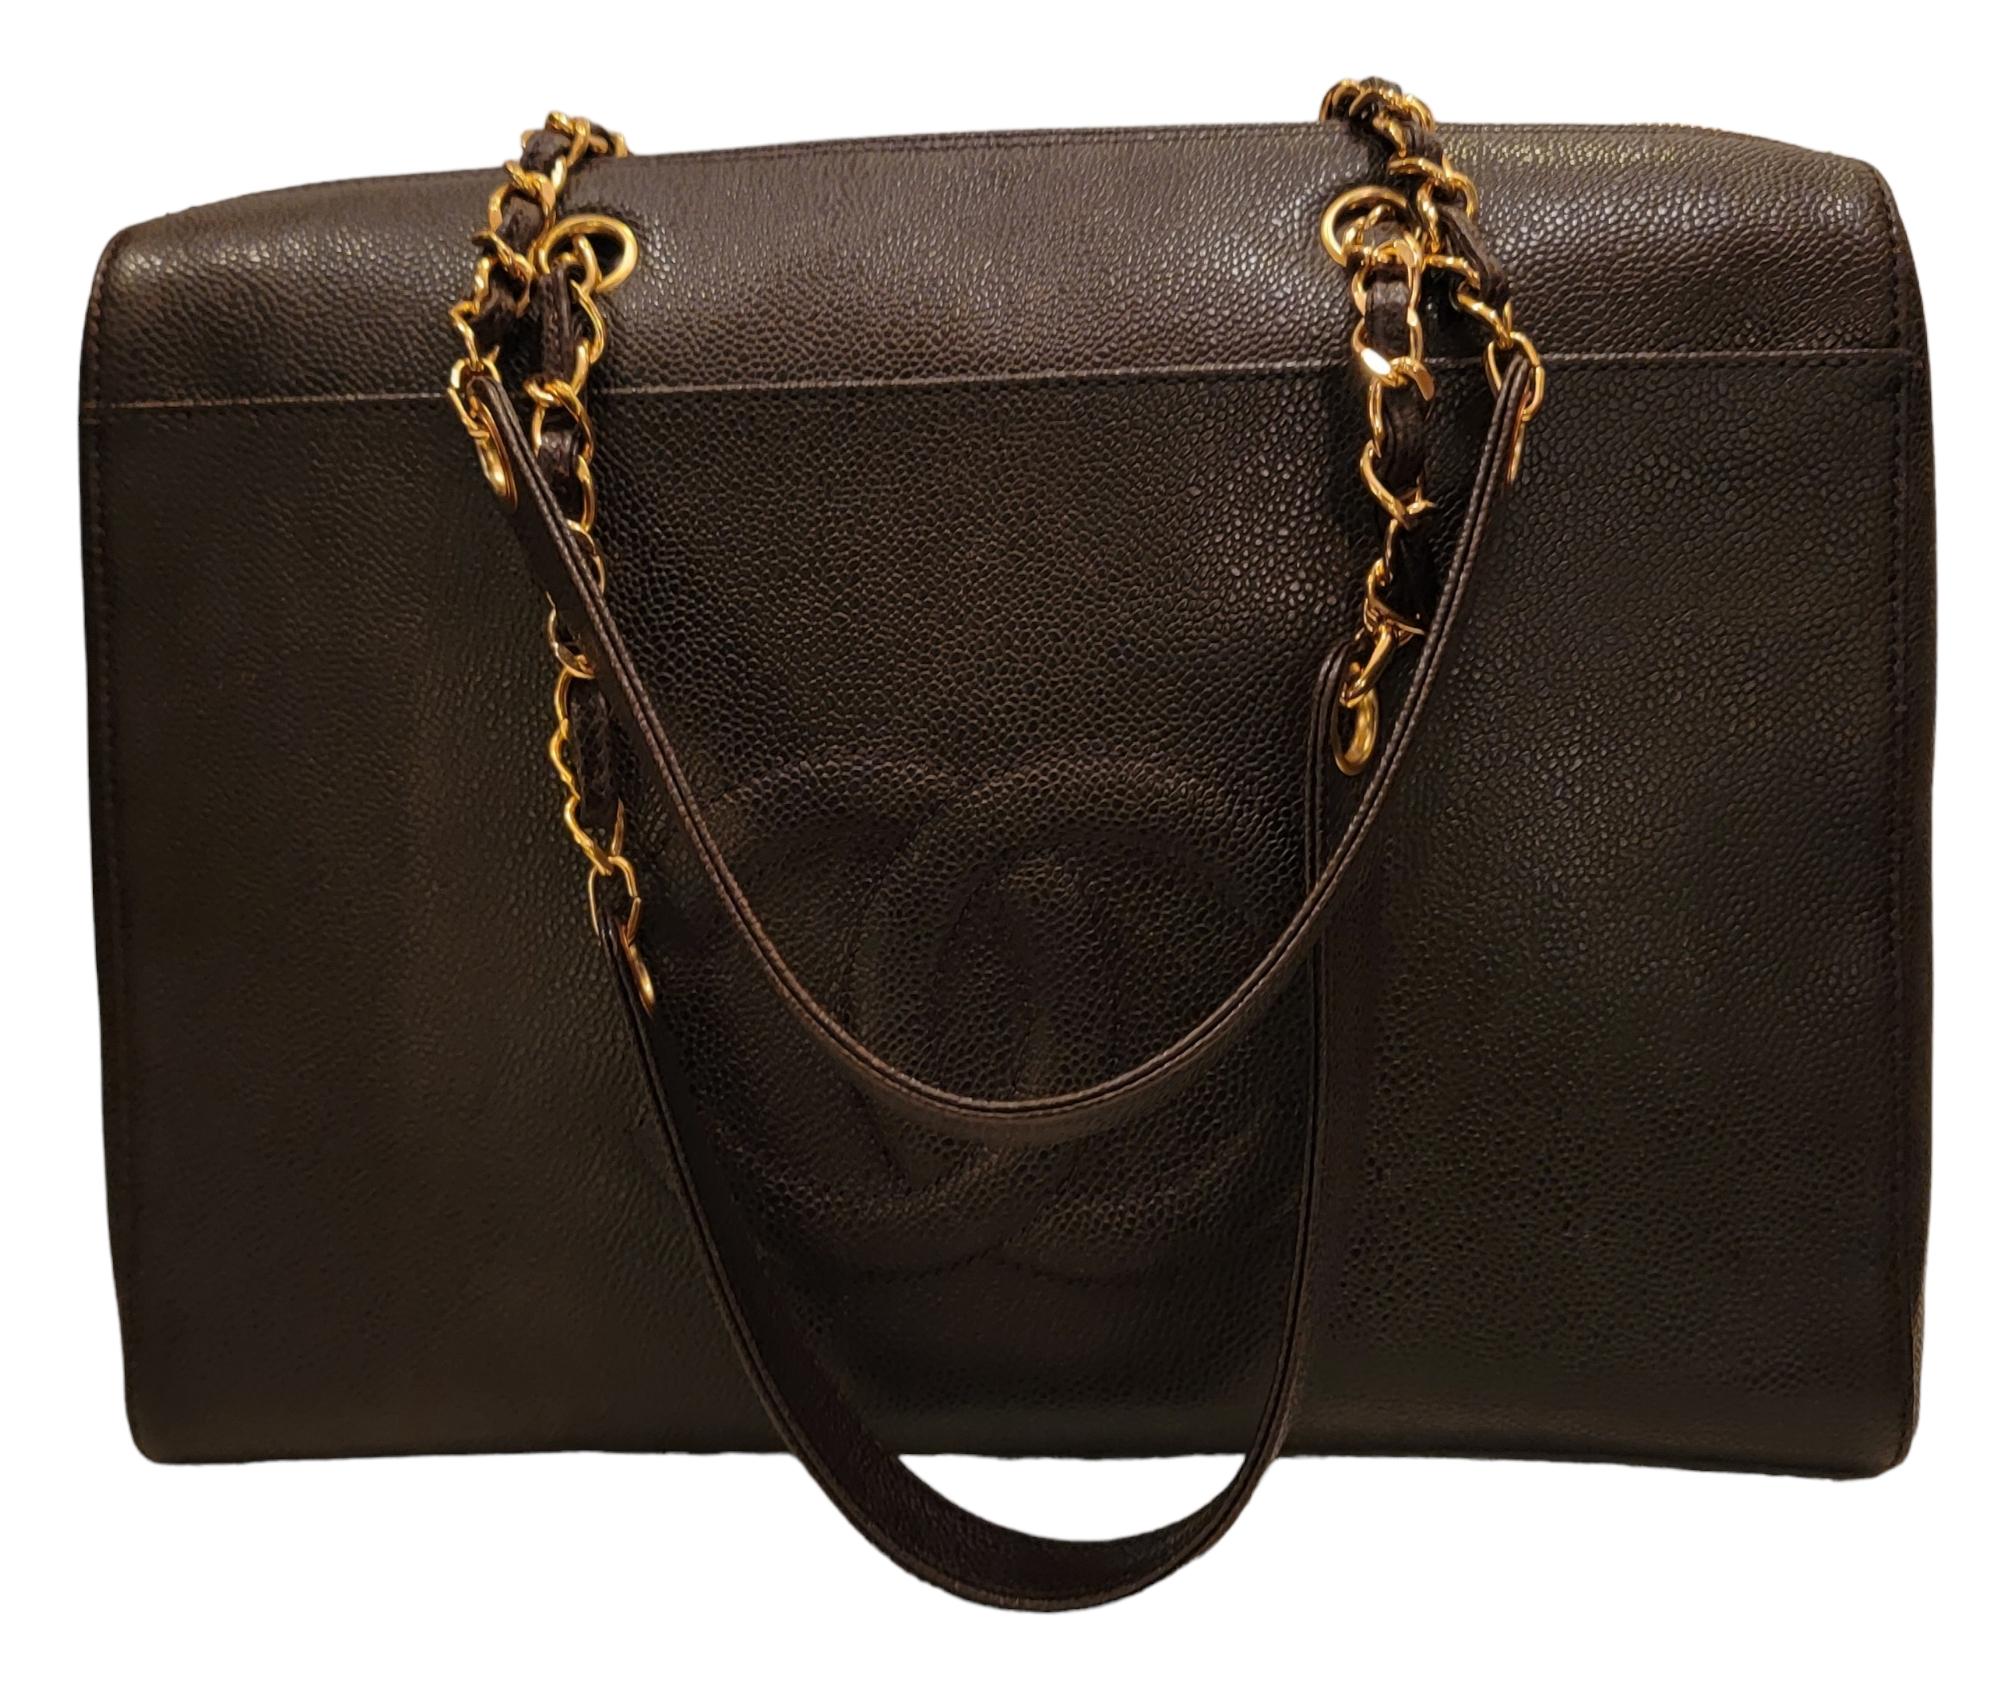 Authentic Super Jumbo Vintage Black Caviar Chanel Shoulder Bag. 
The iconic three-dimensional CC in the front of the bag is a staple of the craftsmanship of Chanels work. 
Chain and leather straps. Great caviar leather in great condition. Lightly